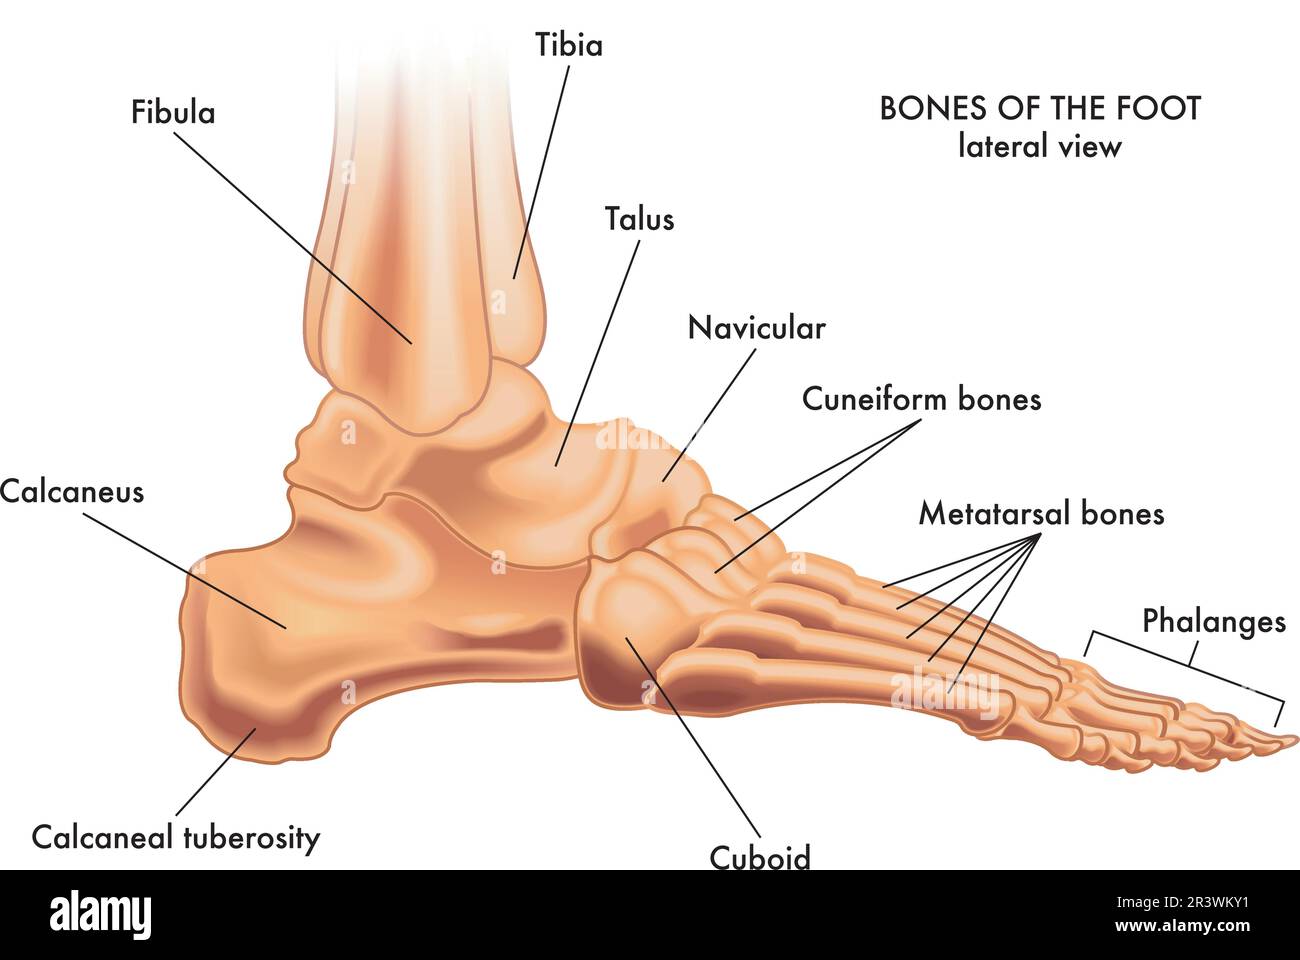 Medical illustration of the major parts of the foot bones in lateral view, with annotations. Stock Vector